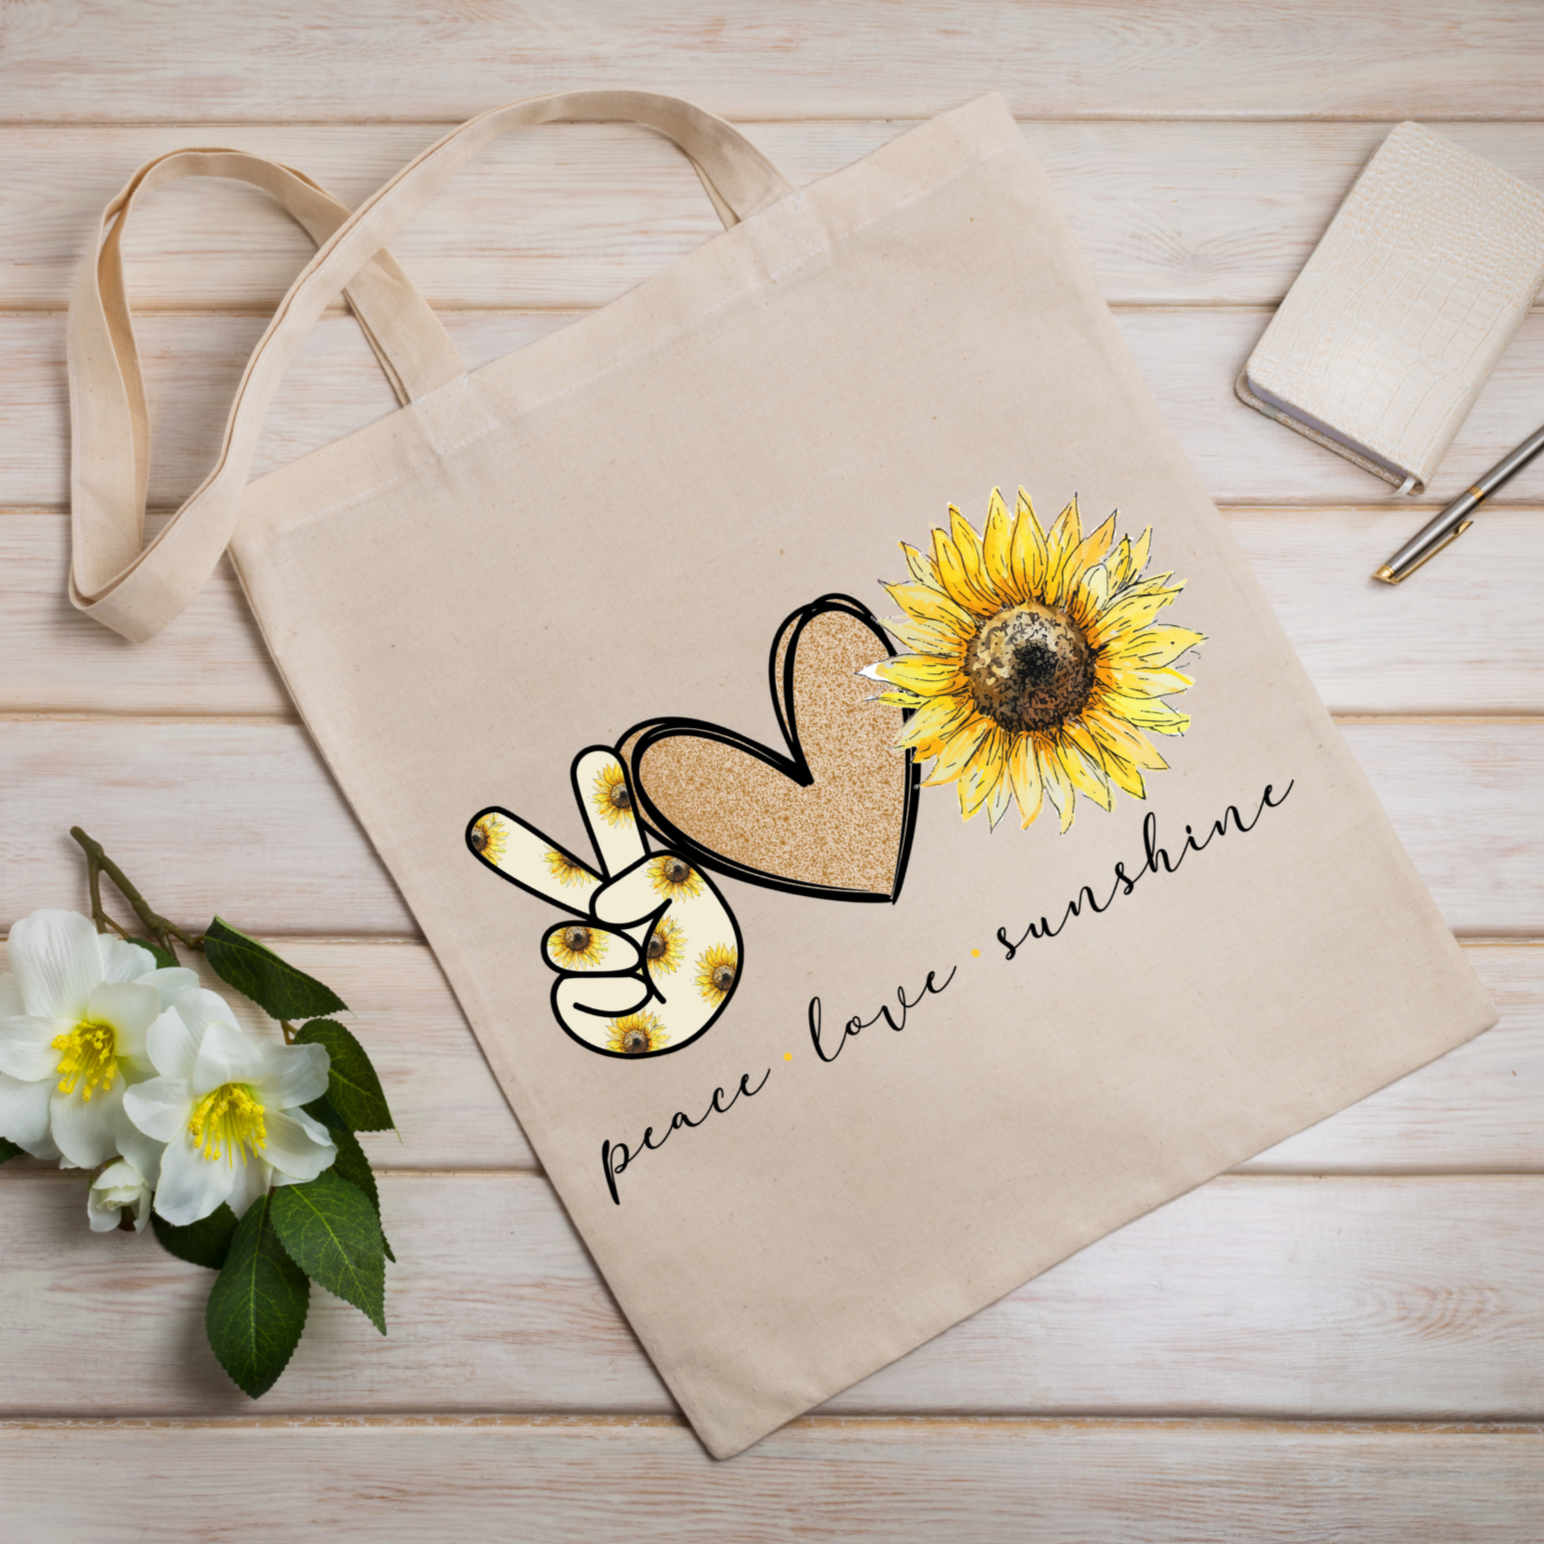 Tote bags – The Lennon Wall